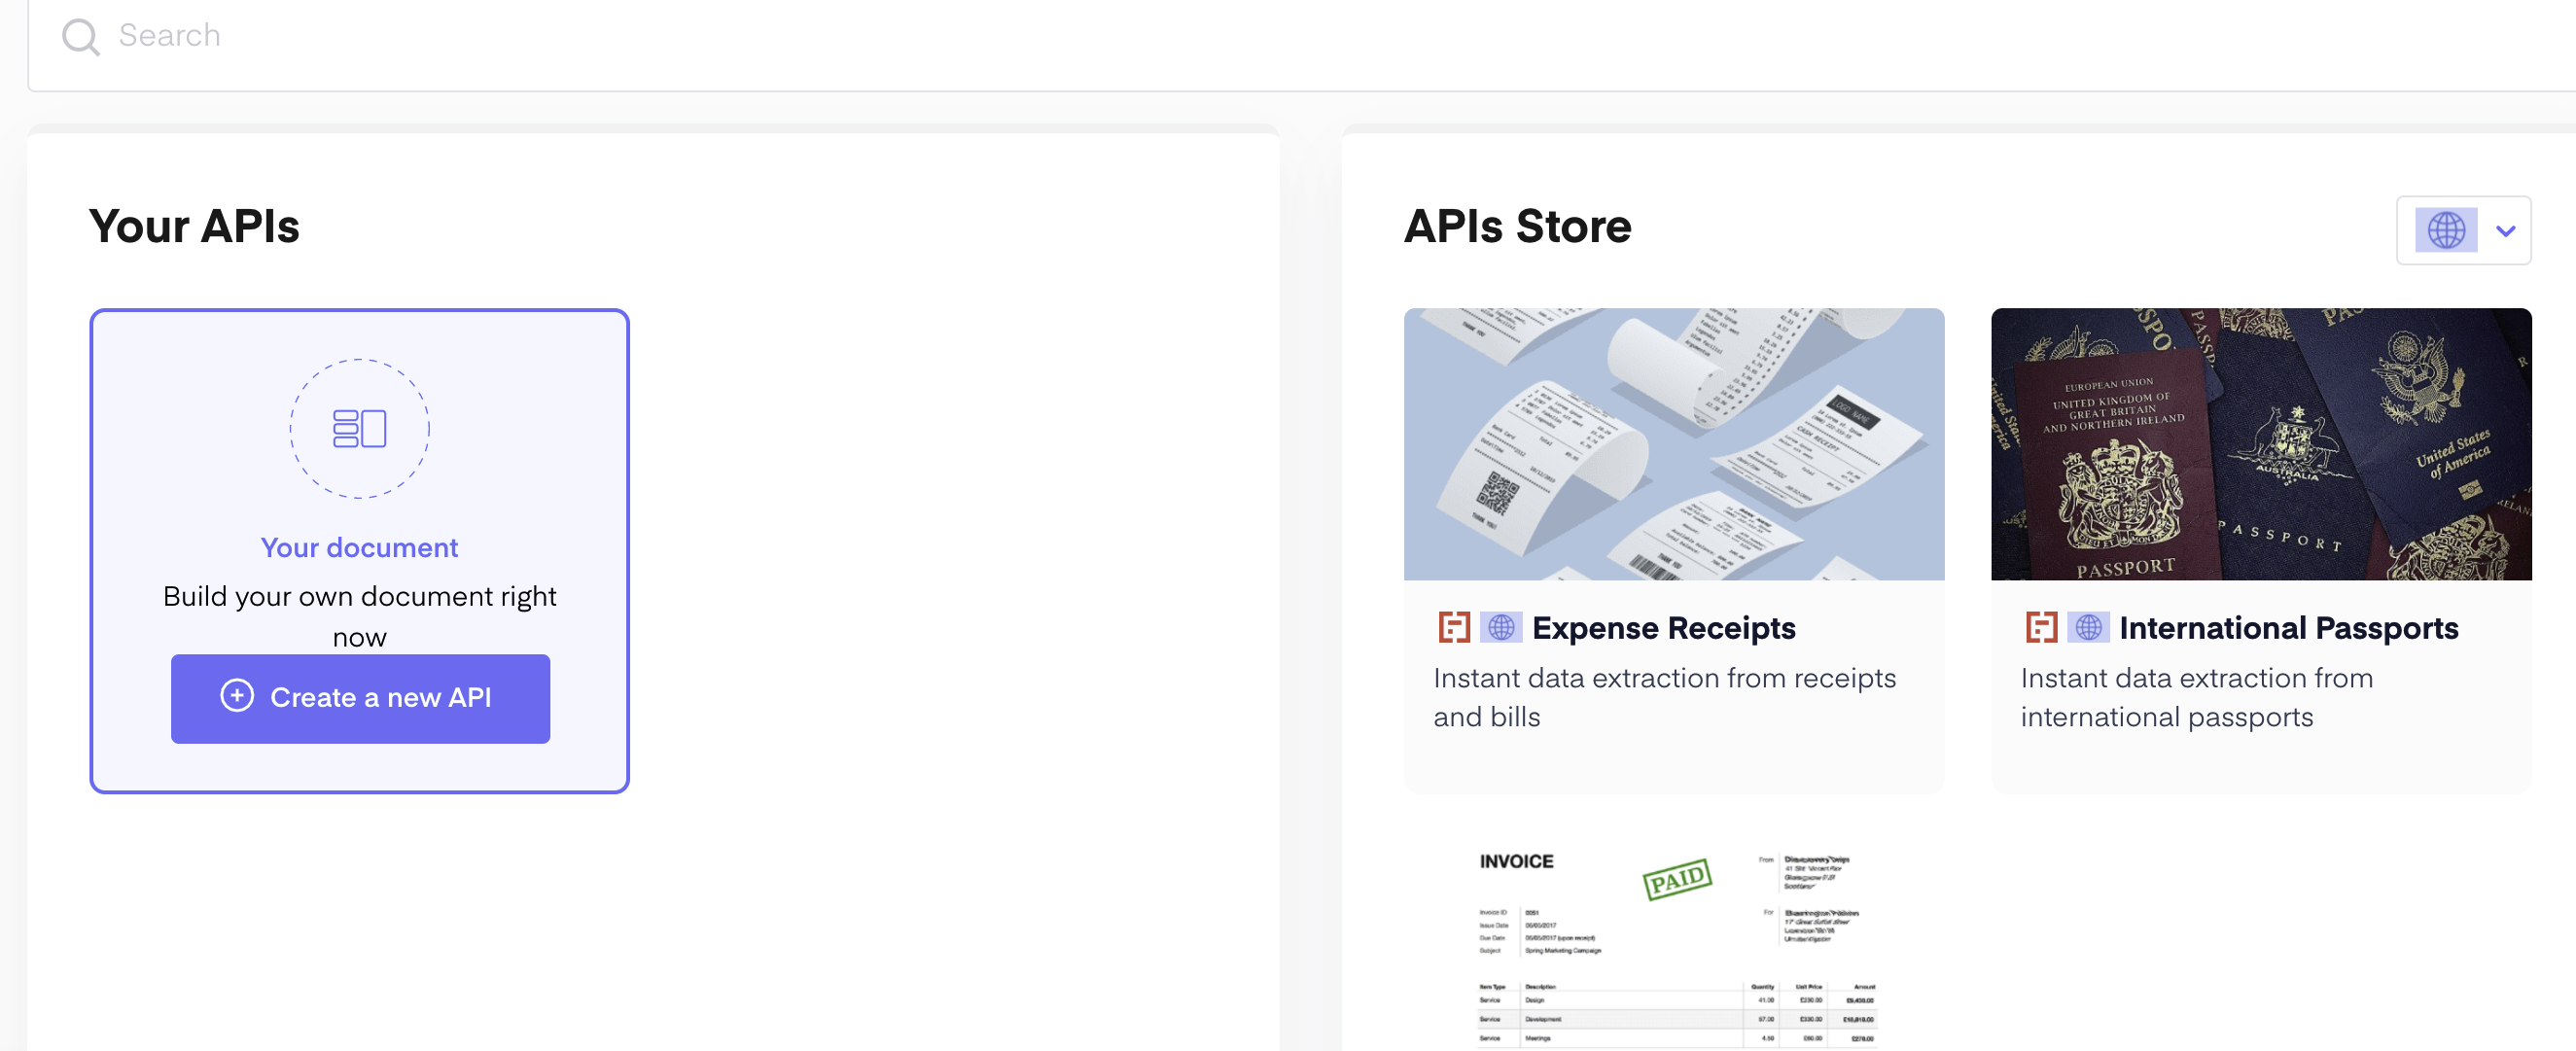 Expense receipts API card on the right